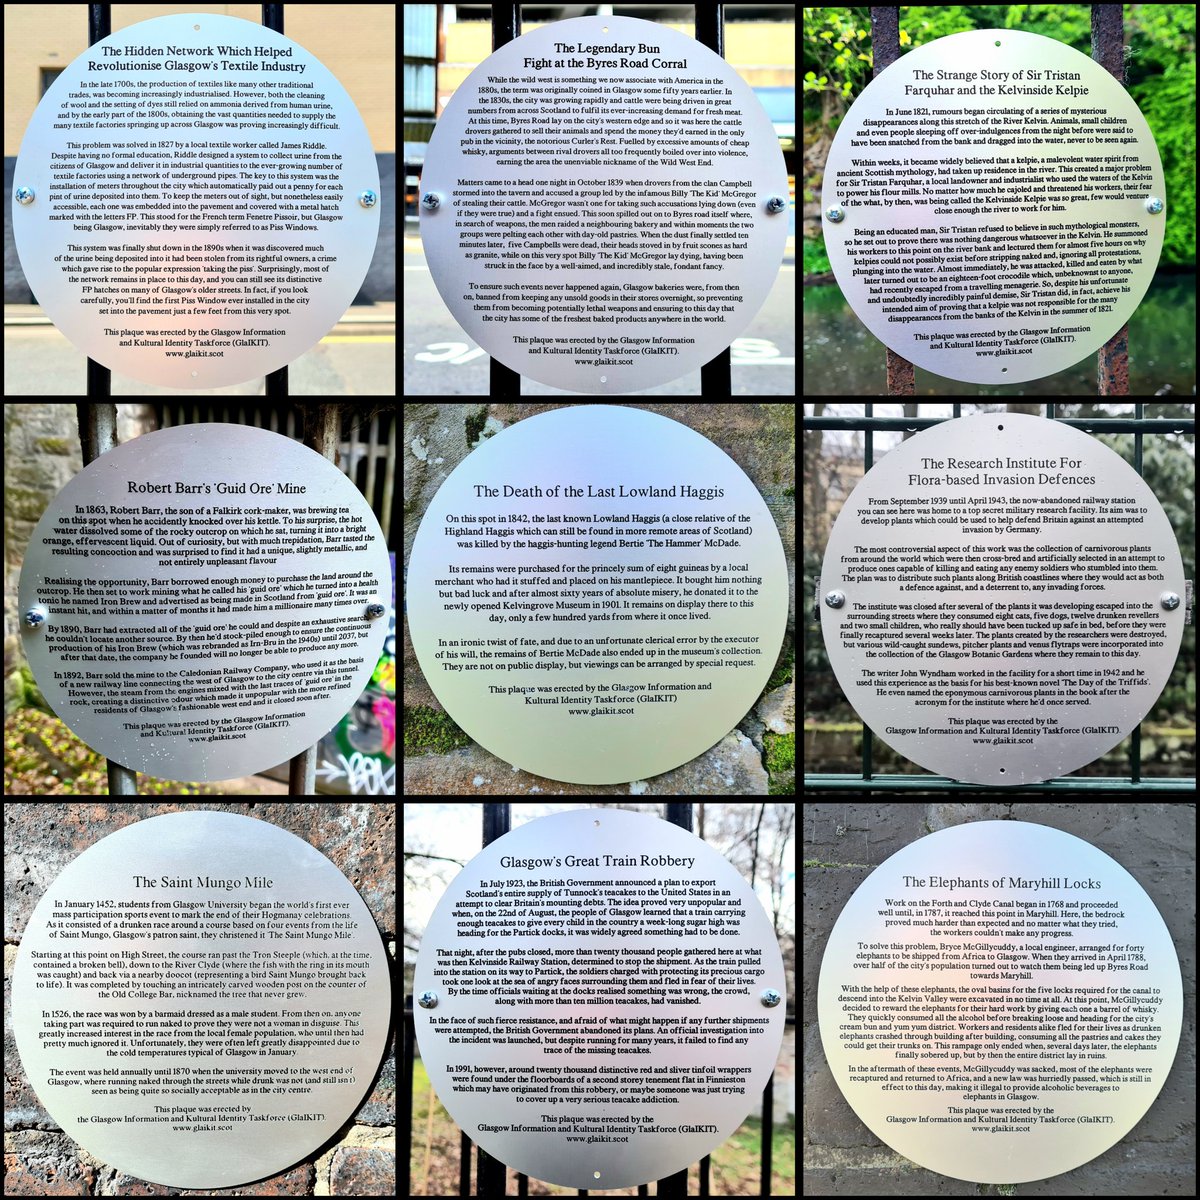 For anyone visiting Glasgow for the @UciWorldCycling and who wants to learn a little more about the host city, we have provided a number of informative plaques. They're not remotely not true, but they are informative! #glasgow #glaikit #glasgowhistory #glasgowhumour